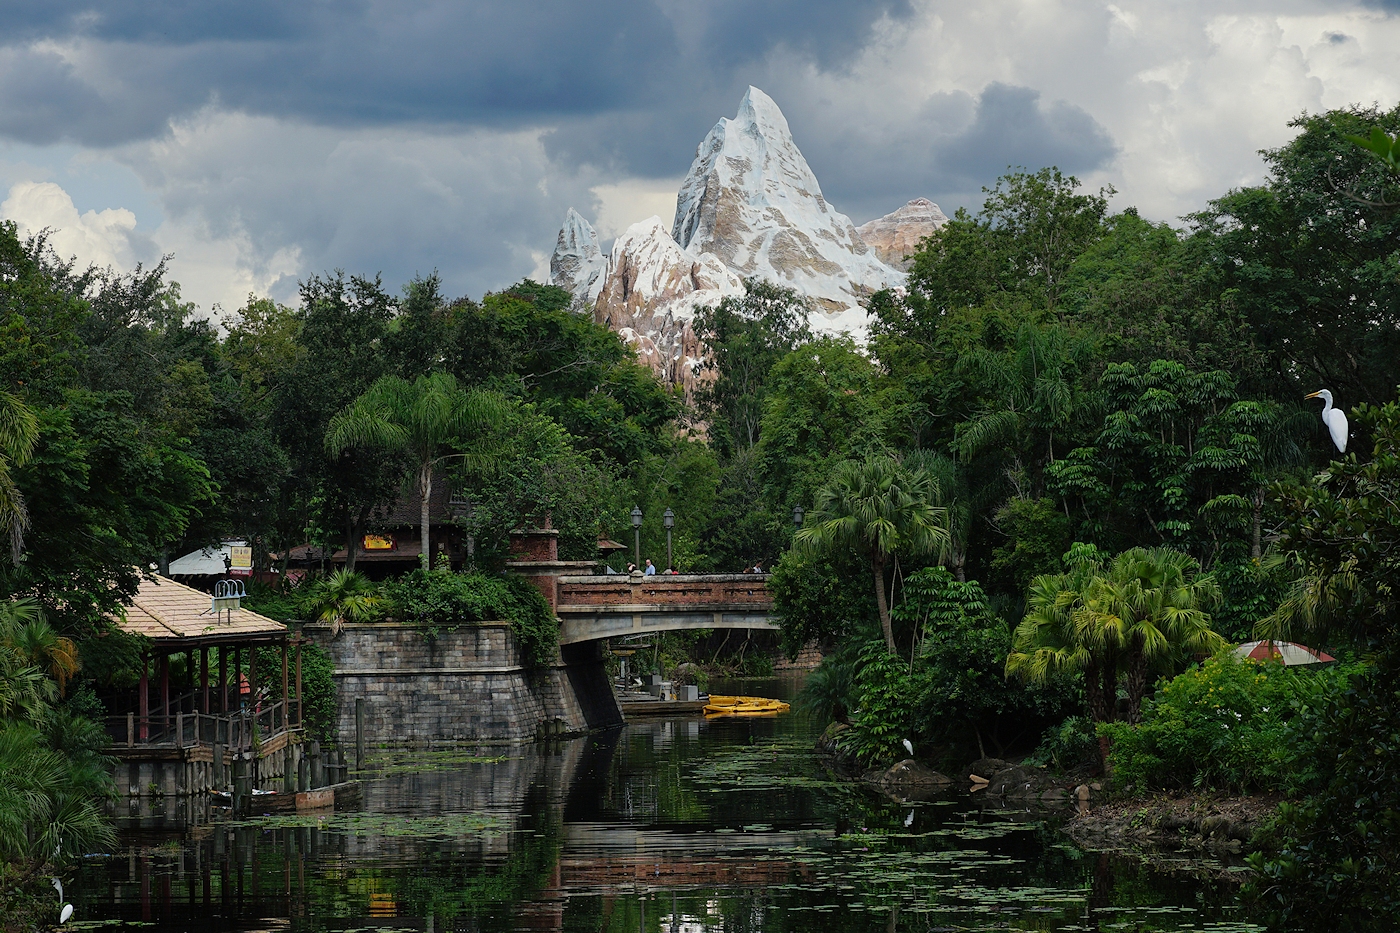 Asia and Everest river scene